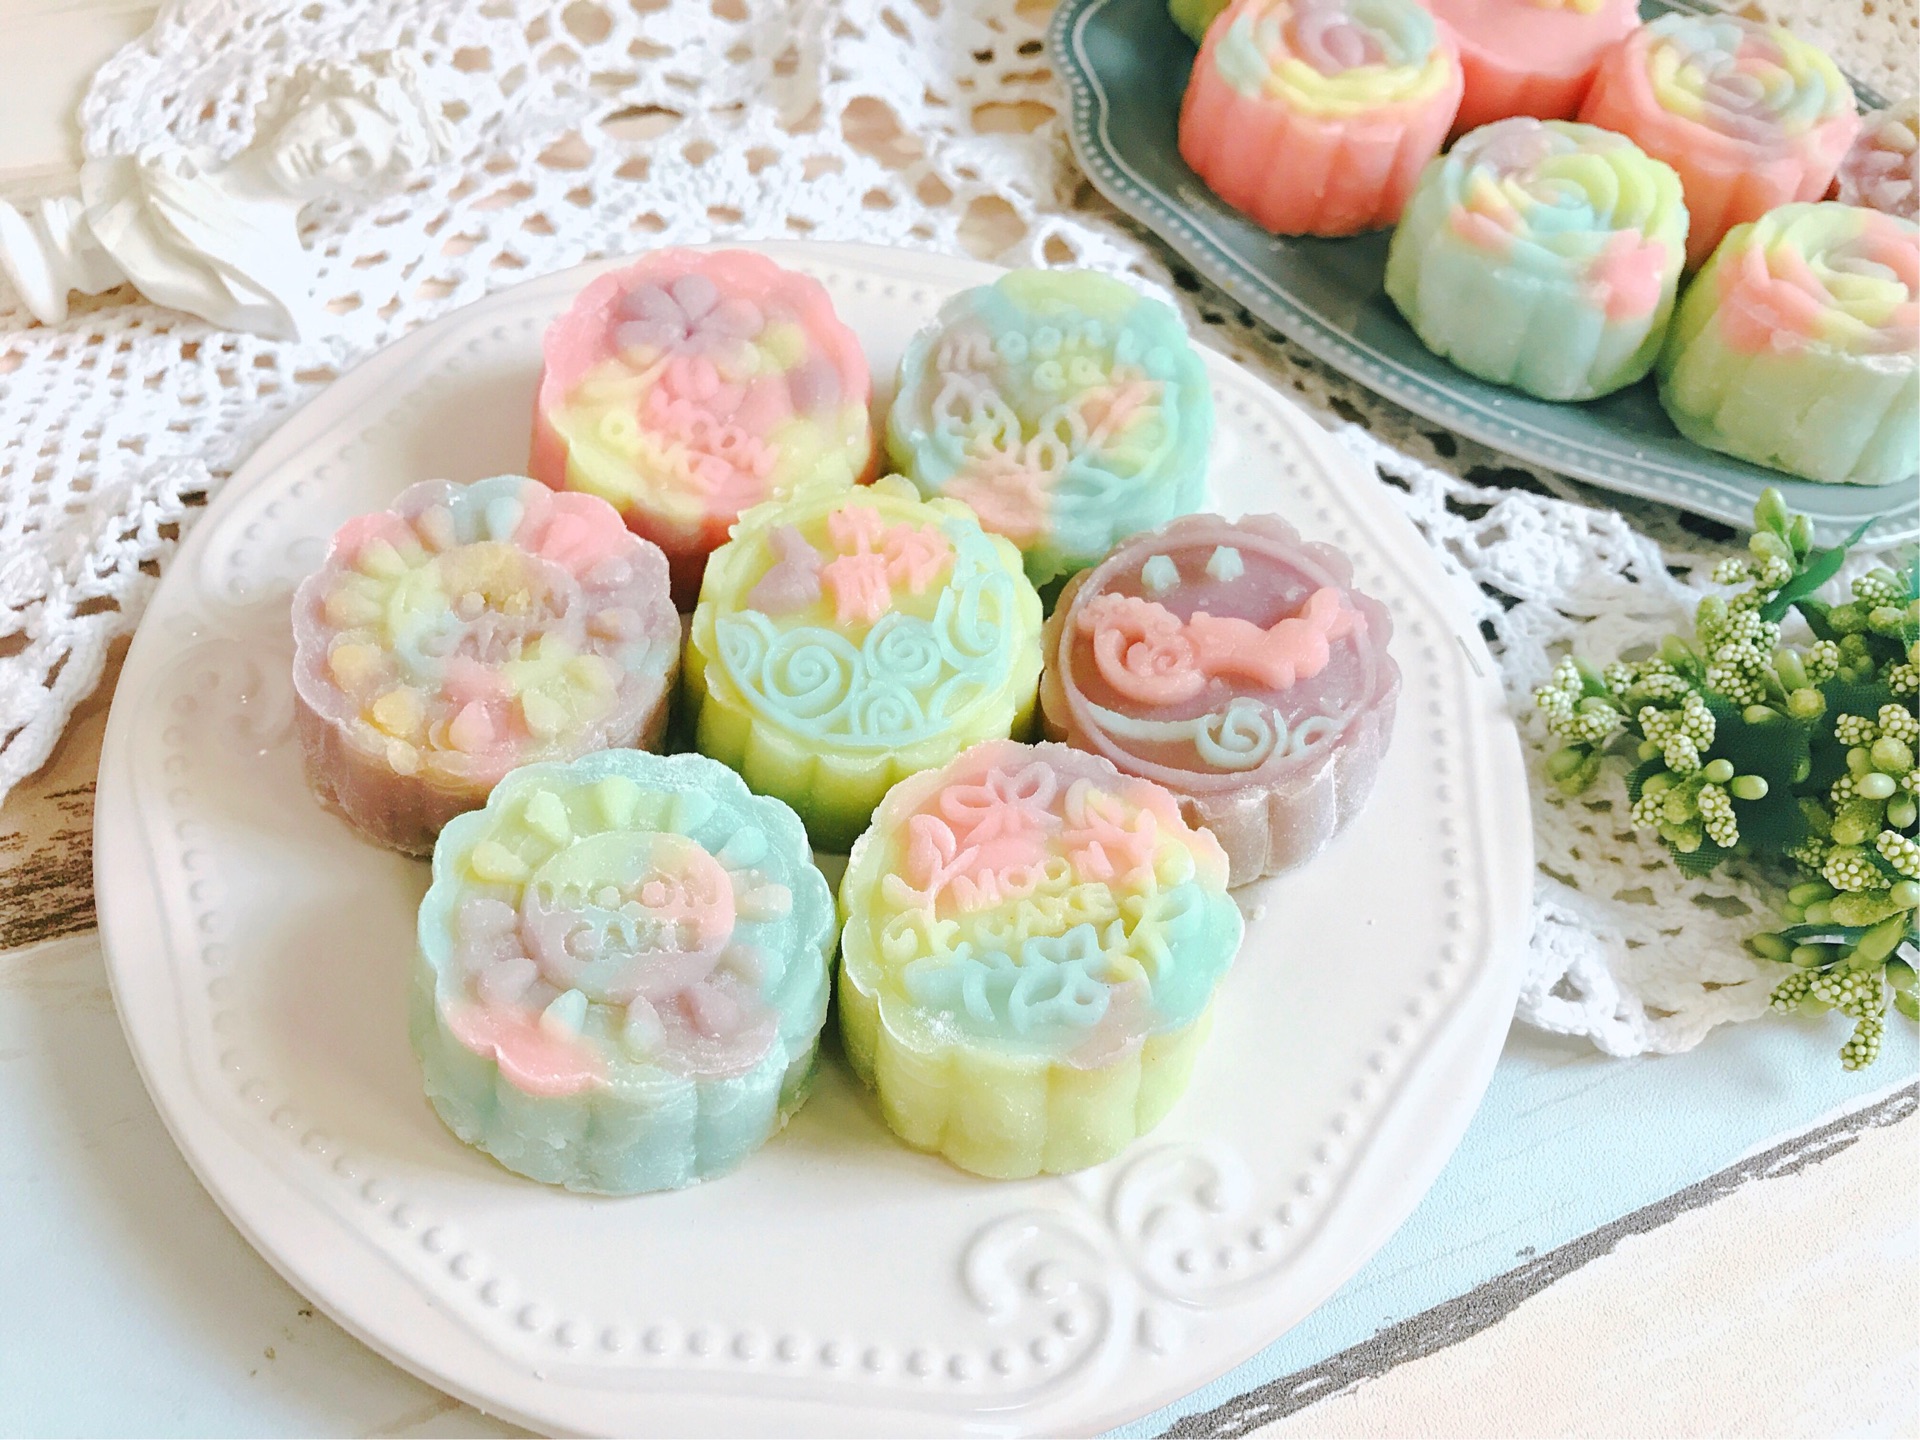 Colorful ice moon cakes